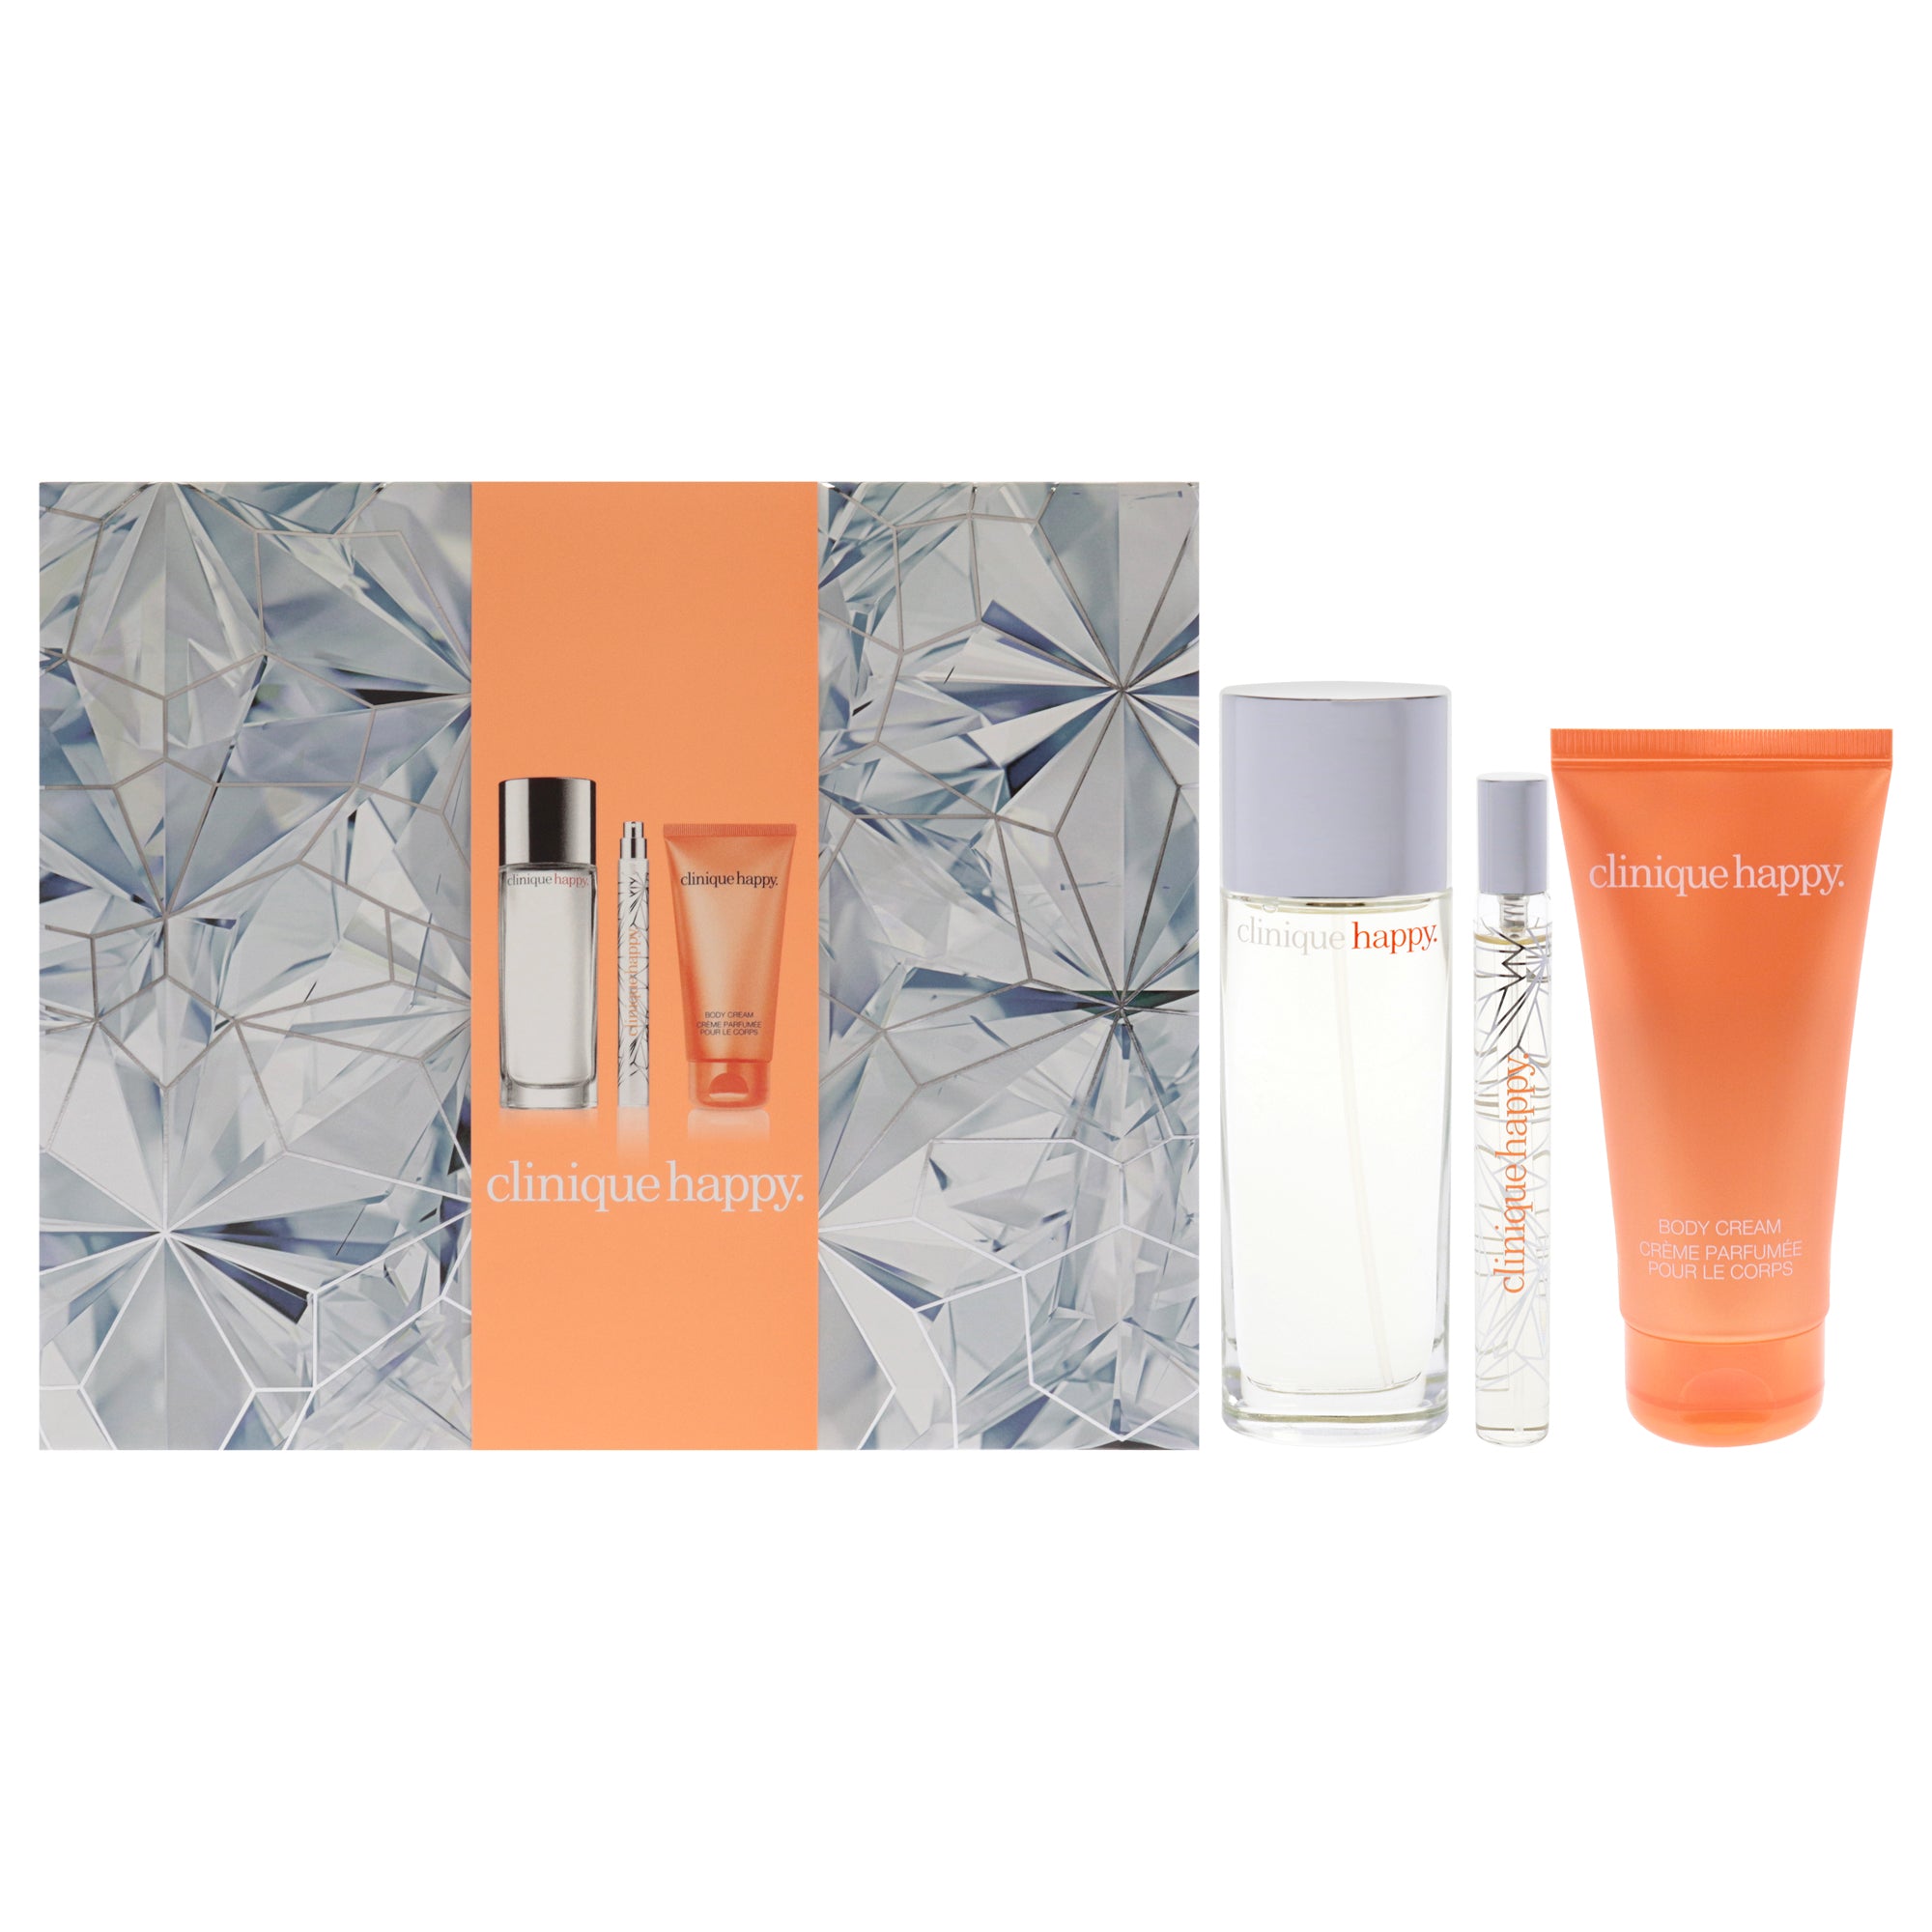 Perfectly Happy Set by Clinique for Women - 3 Pc Kit 1.7oz Clinique Happy Perfume Spray, 0.34oz Clinique Happy Perfume Spray, 2.5oz Clinique Happy Body Cream